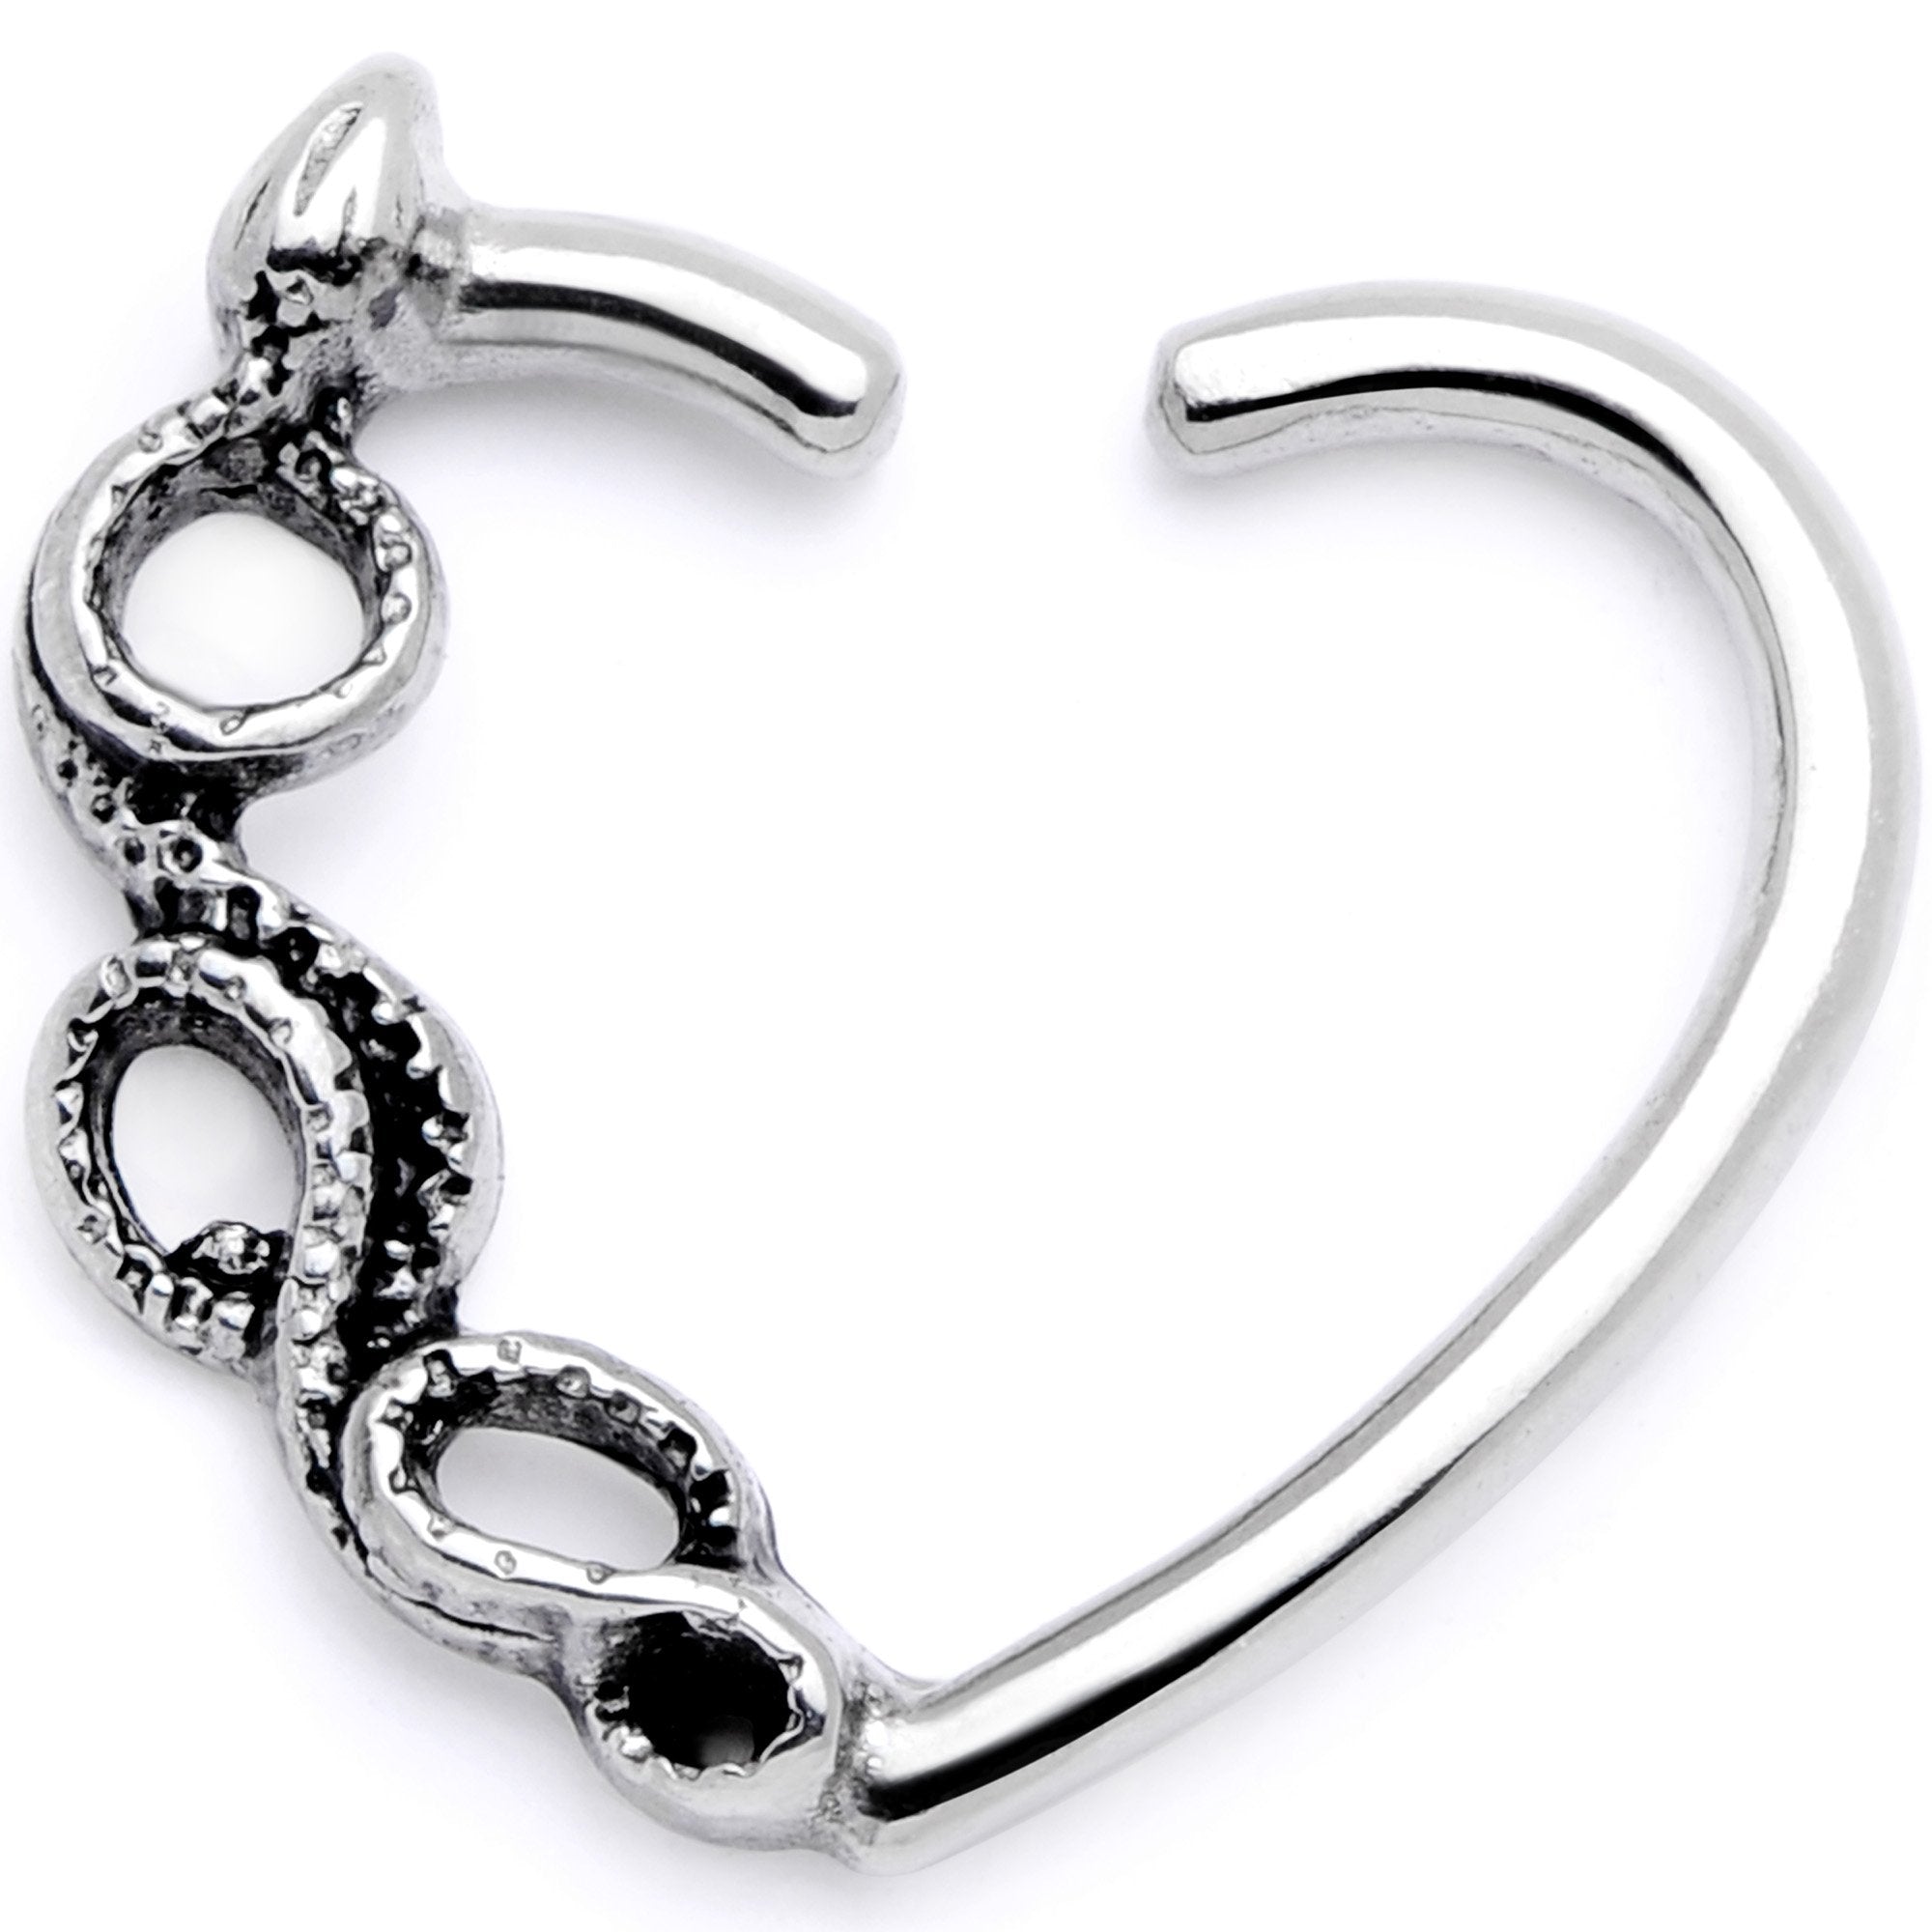 16 Gauge 3/8 Scary Slithering Snake Right Heart Closure Ring